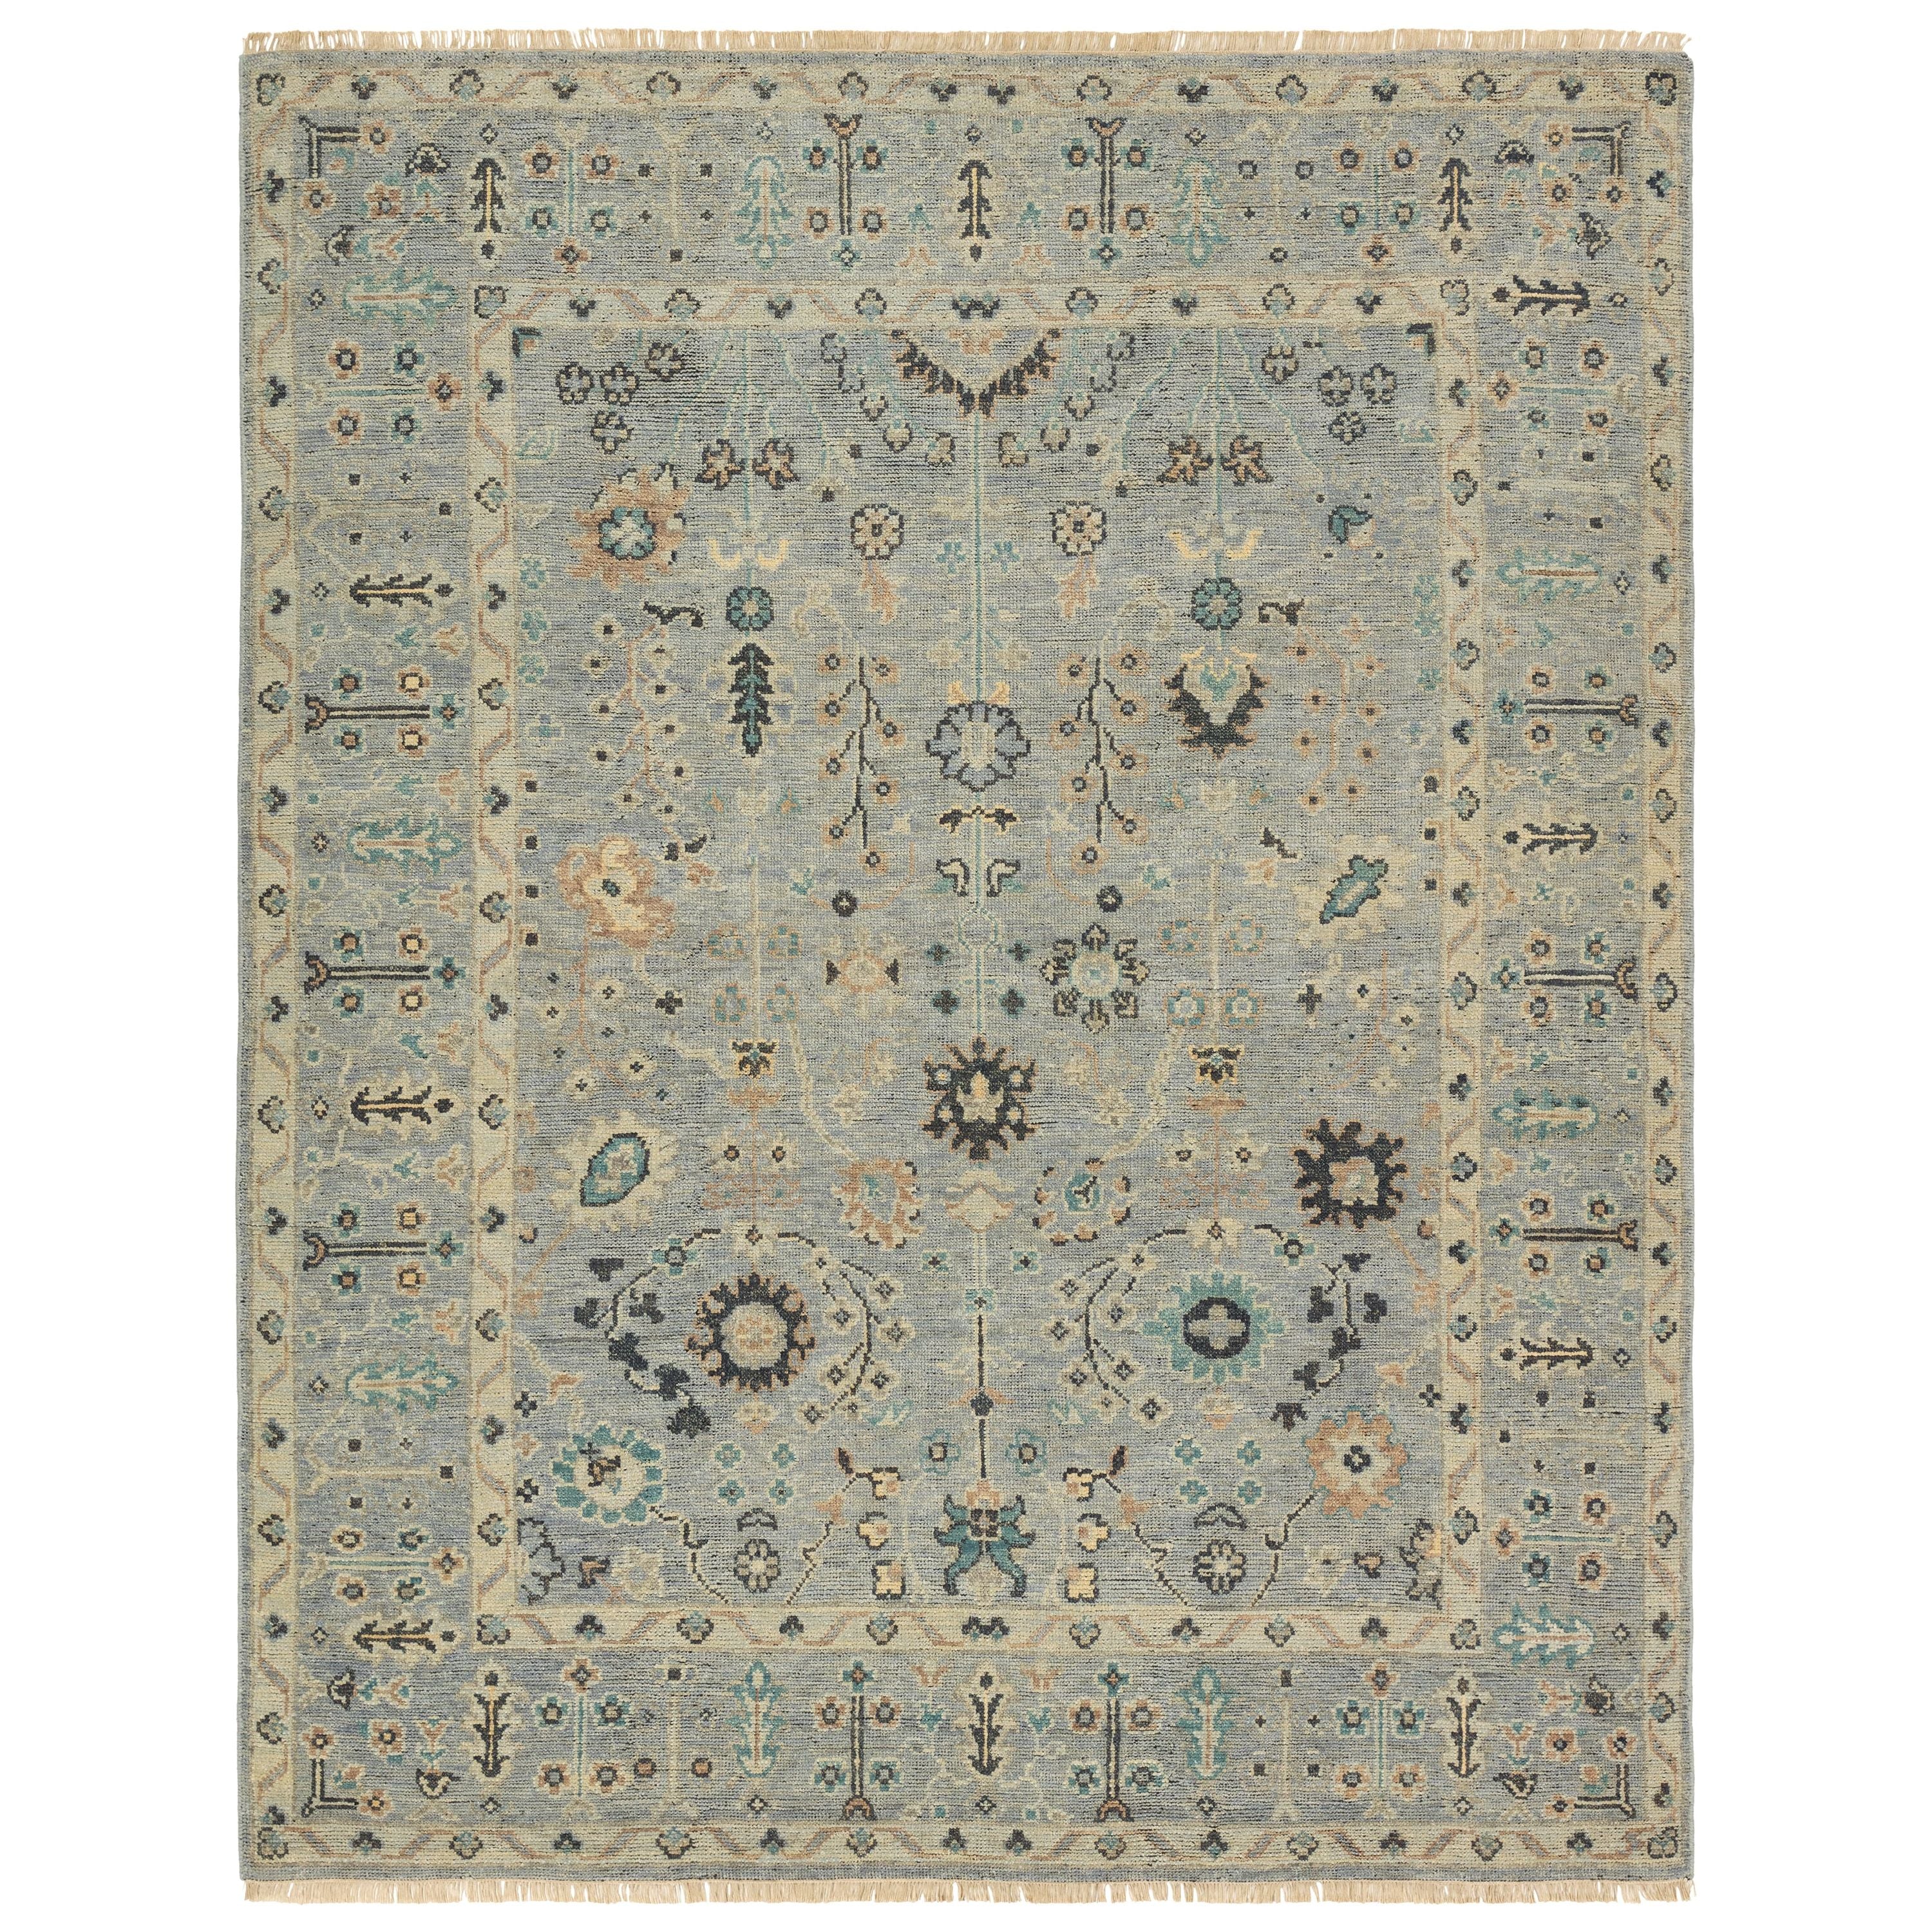 The Rhapsody collection features heirloom-quality designs of stunningly abrashed Old World patterns. The Nysa area rug boasts a beautifully washed floral motif with a decorative border. The blue tone is accented with rich green, tan, navy, and cream hues for added depth and intrigue. This durable wool handknot anchors living spaces with a fresh take on vintage style. Amethyst Home provides interior design, new construction, custom furniture, and area rugs in the Nashville metro area.